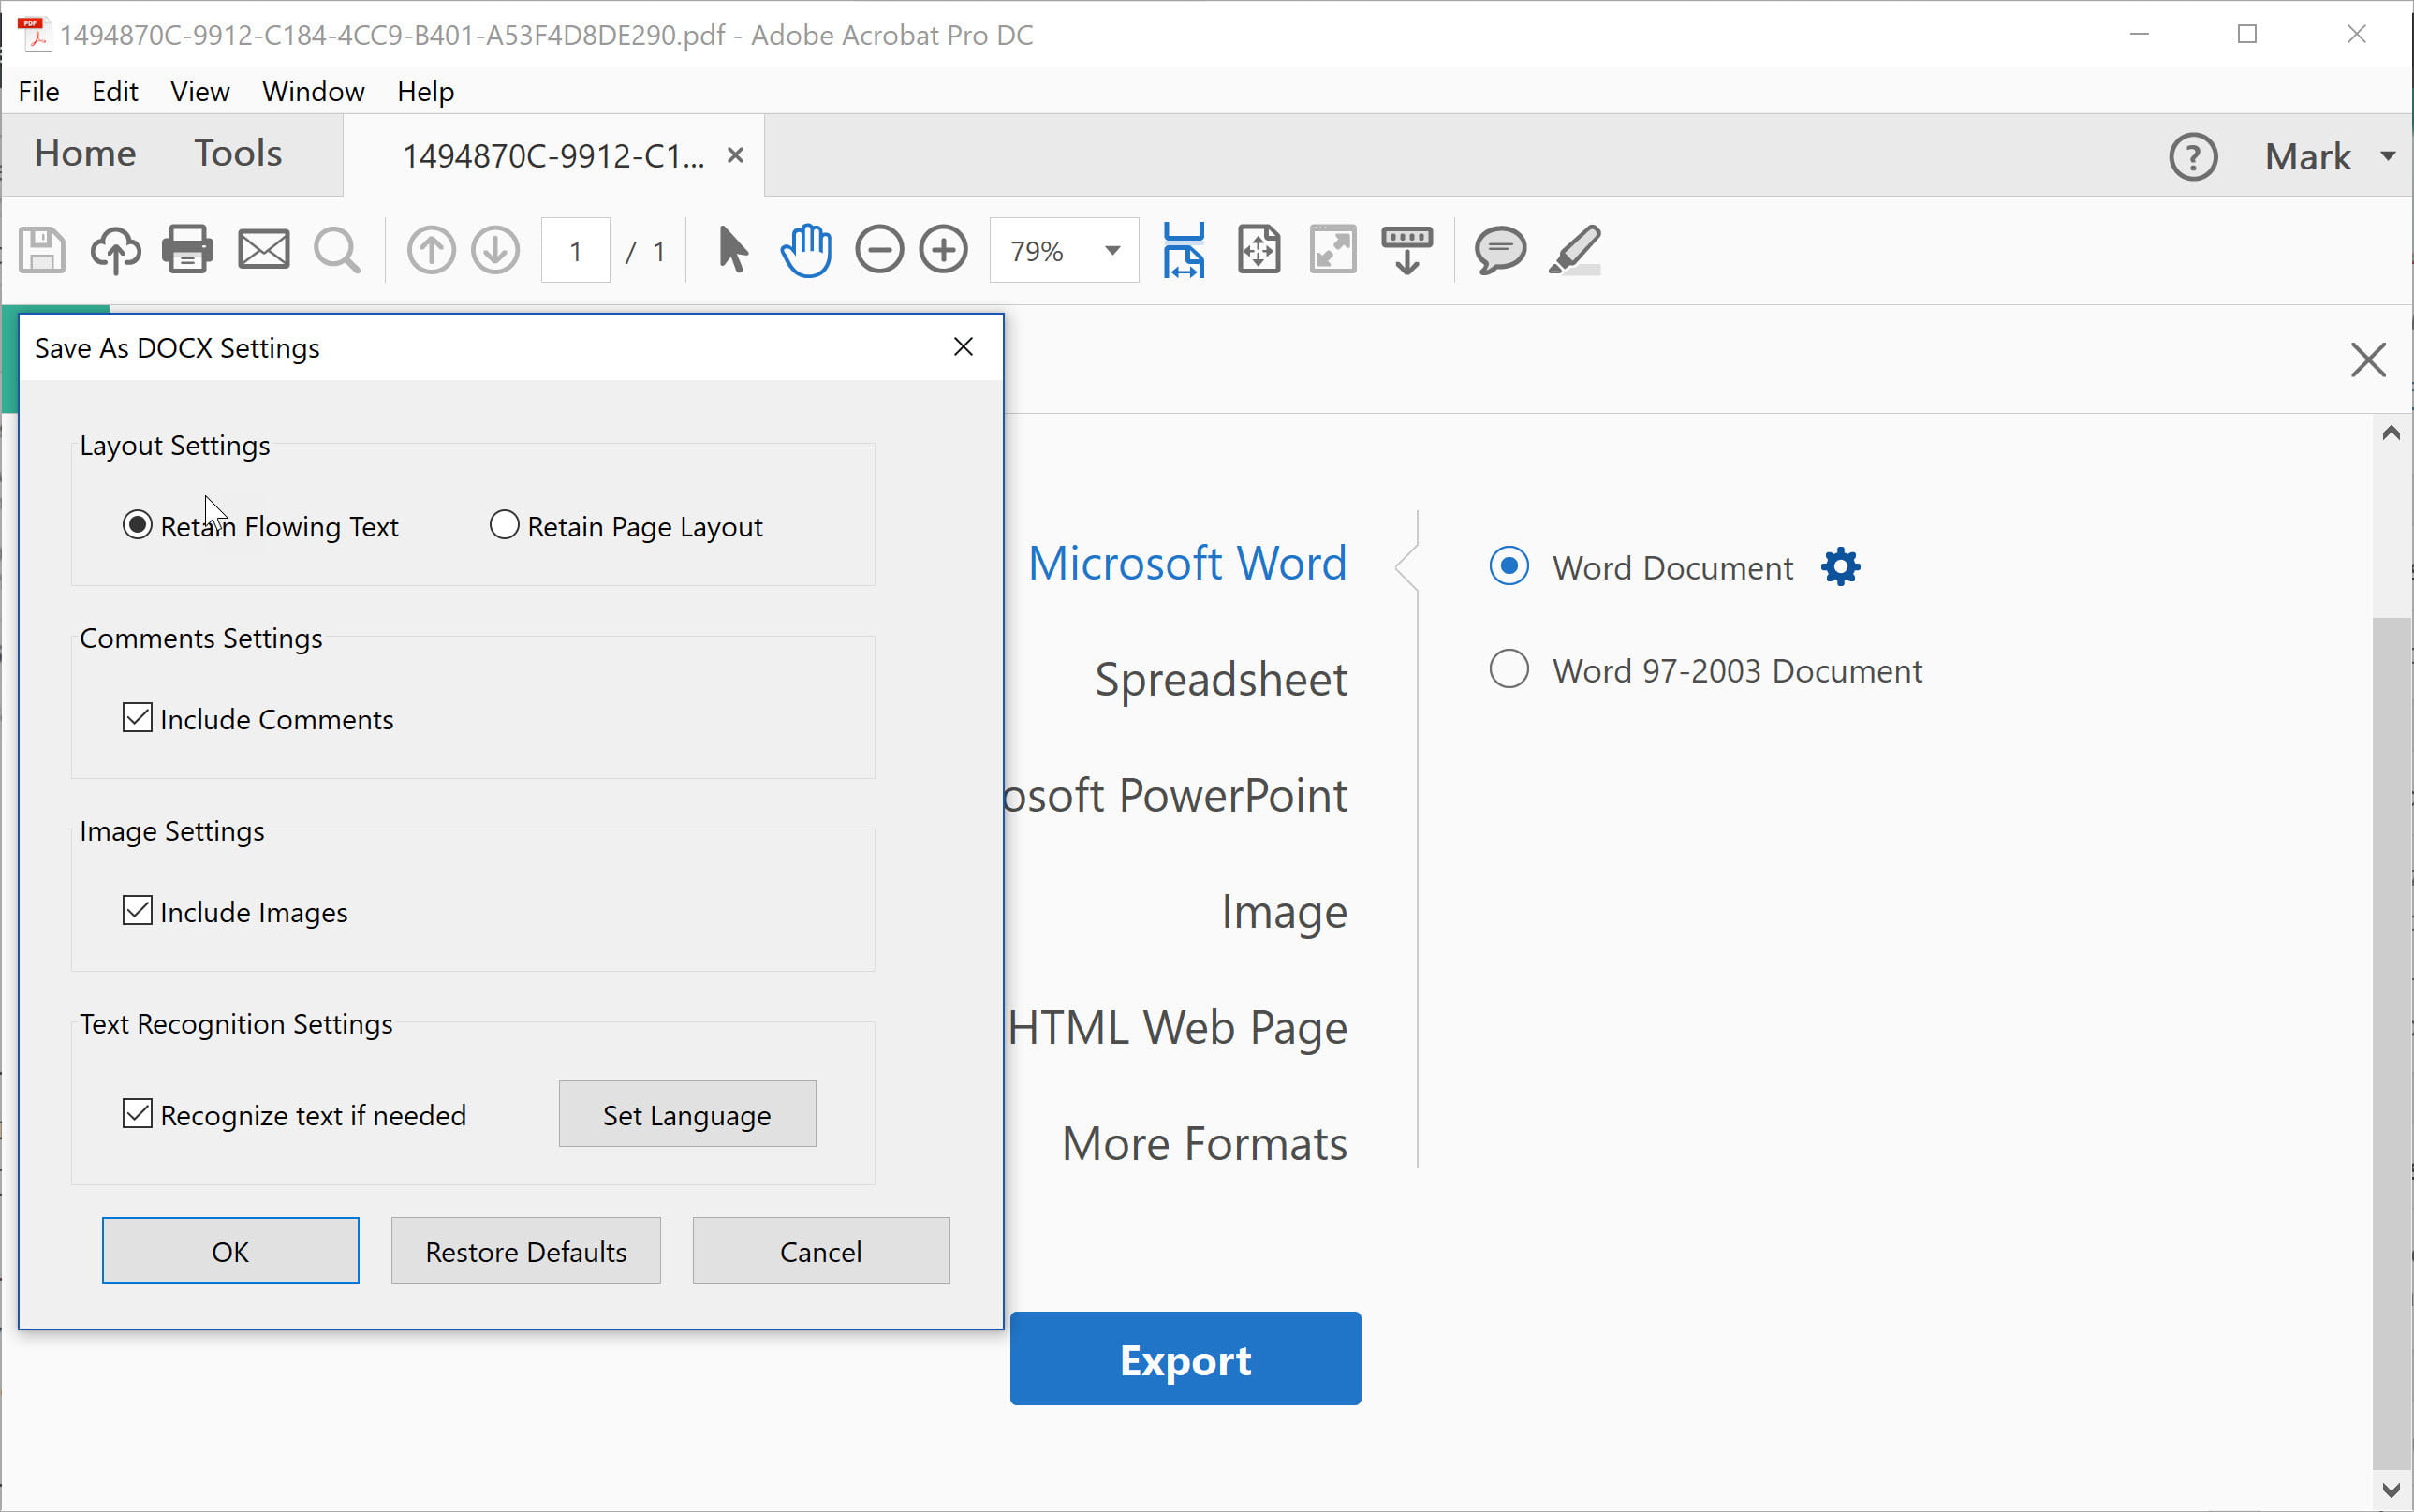 How can we change pdf file to word file